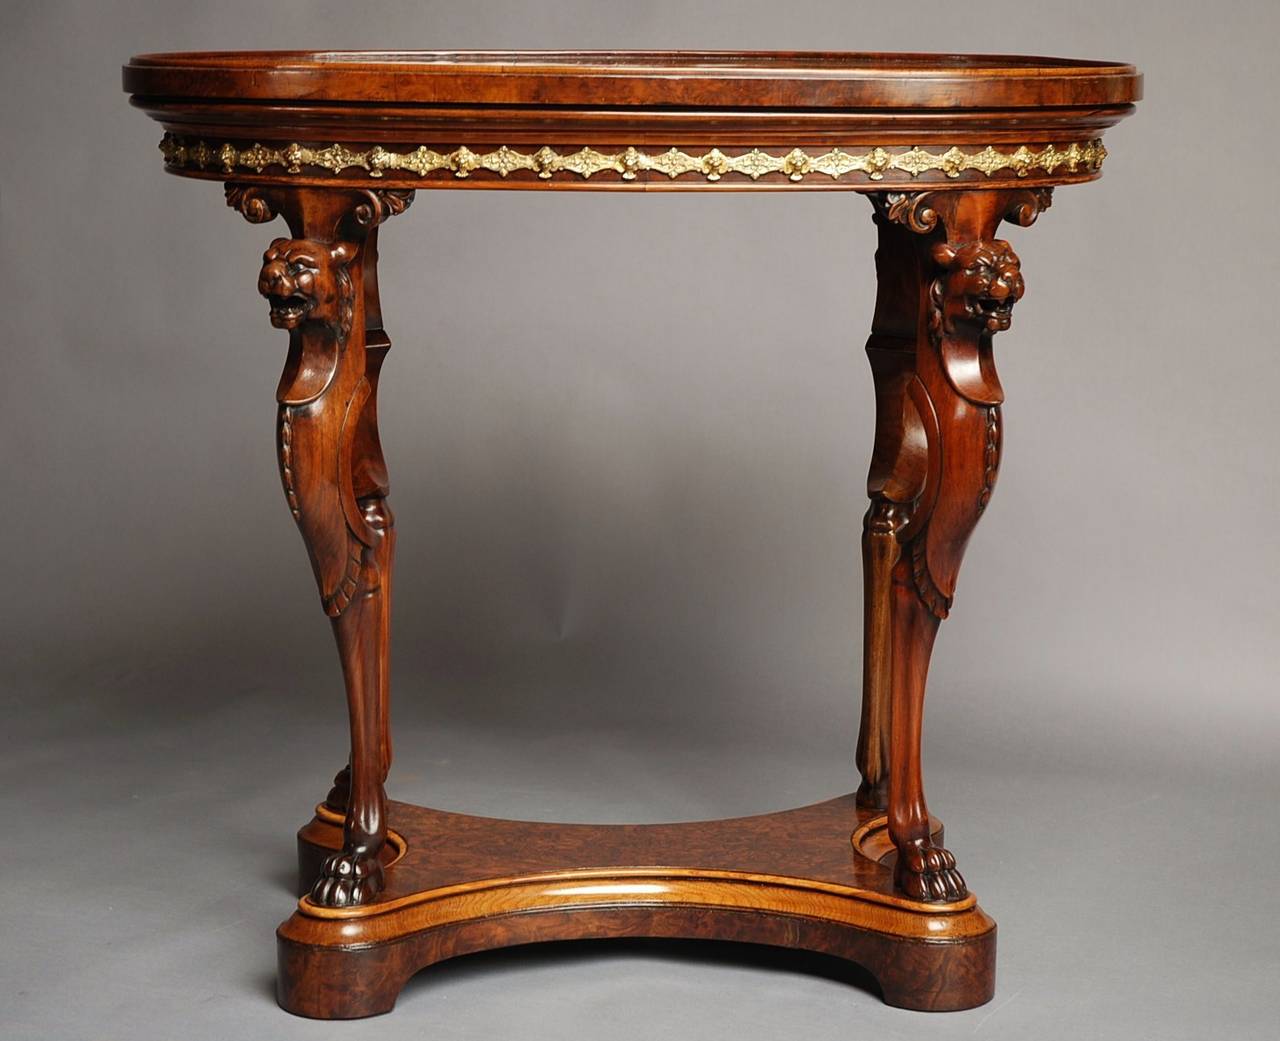 A rare mid-19th century burr walnut centre table of superb quality by Holland & Sons, designed by the architect Gottfried Semper (1803-1879) recently acquired from a private collection and in the same important titled family estate since it was